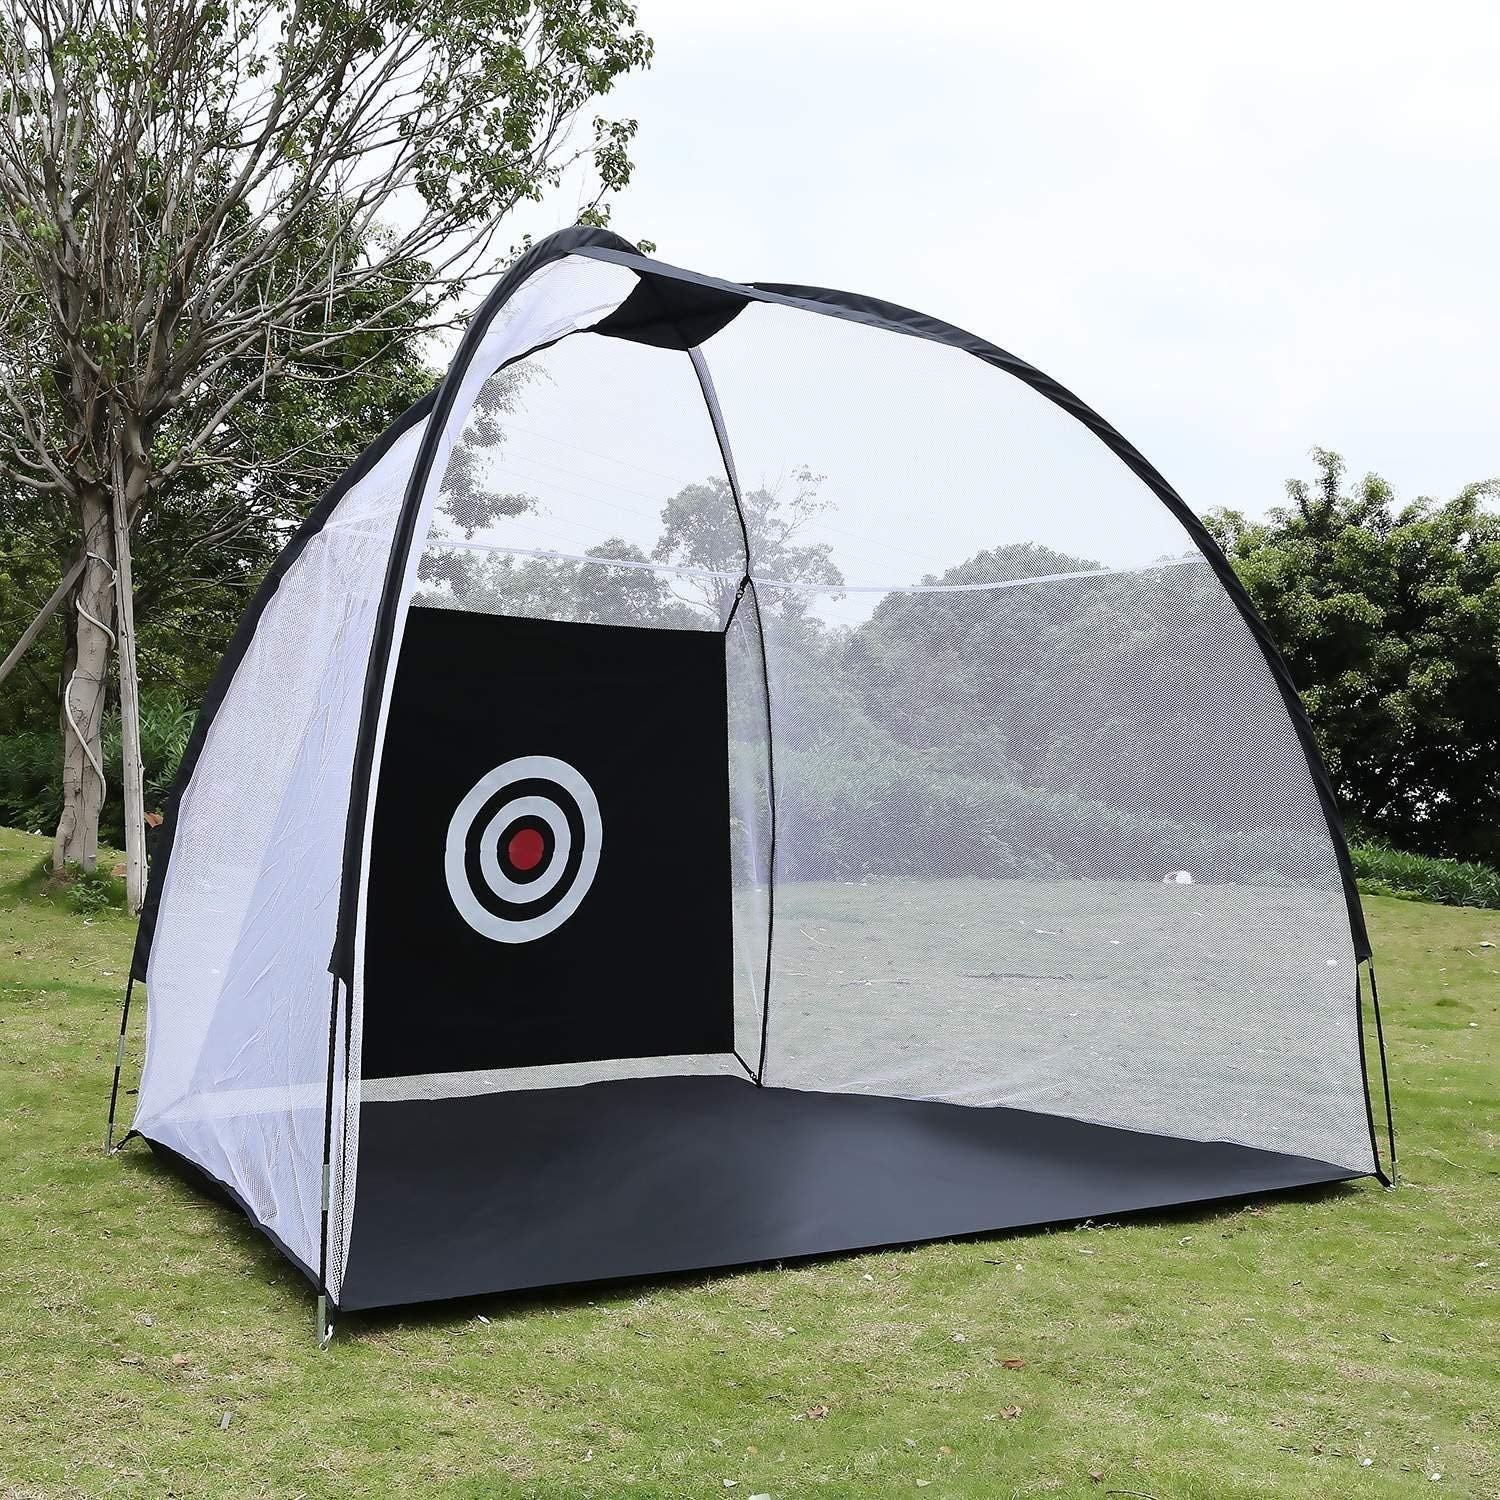 Golf Net (10x7 FT) with Carry Bag, Easy Set Up, Take Down, 7 PLY Knotted  Netting